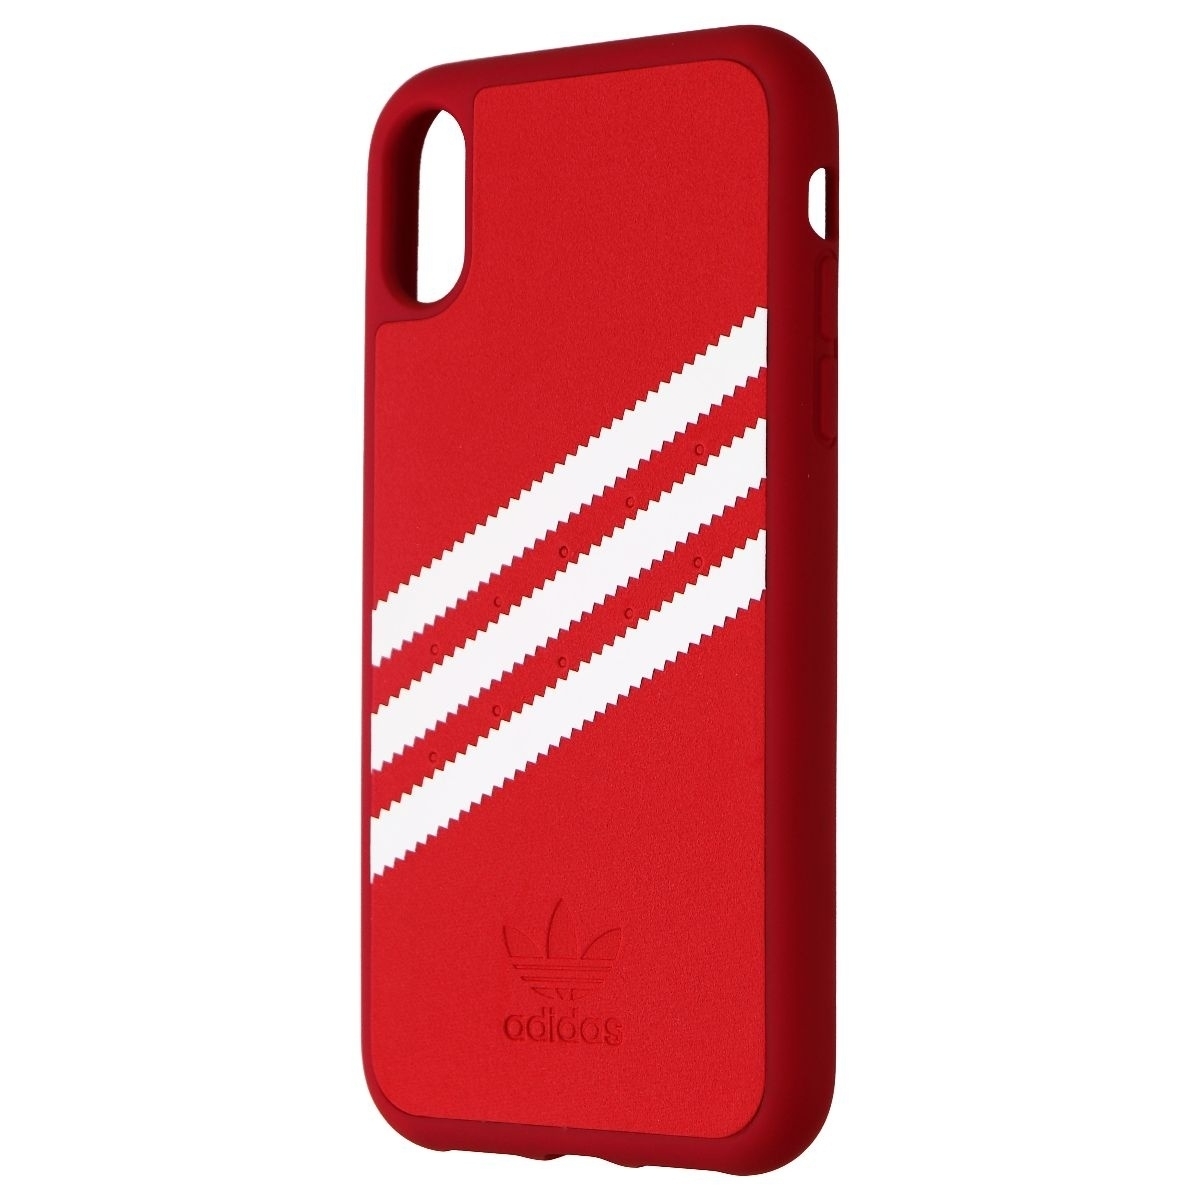 Adidas 3-Strips Snap Case For Apple IPhone XR Smartphones - Red/White Stripe